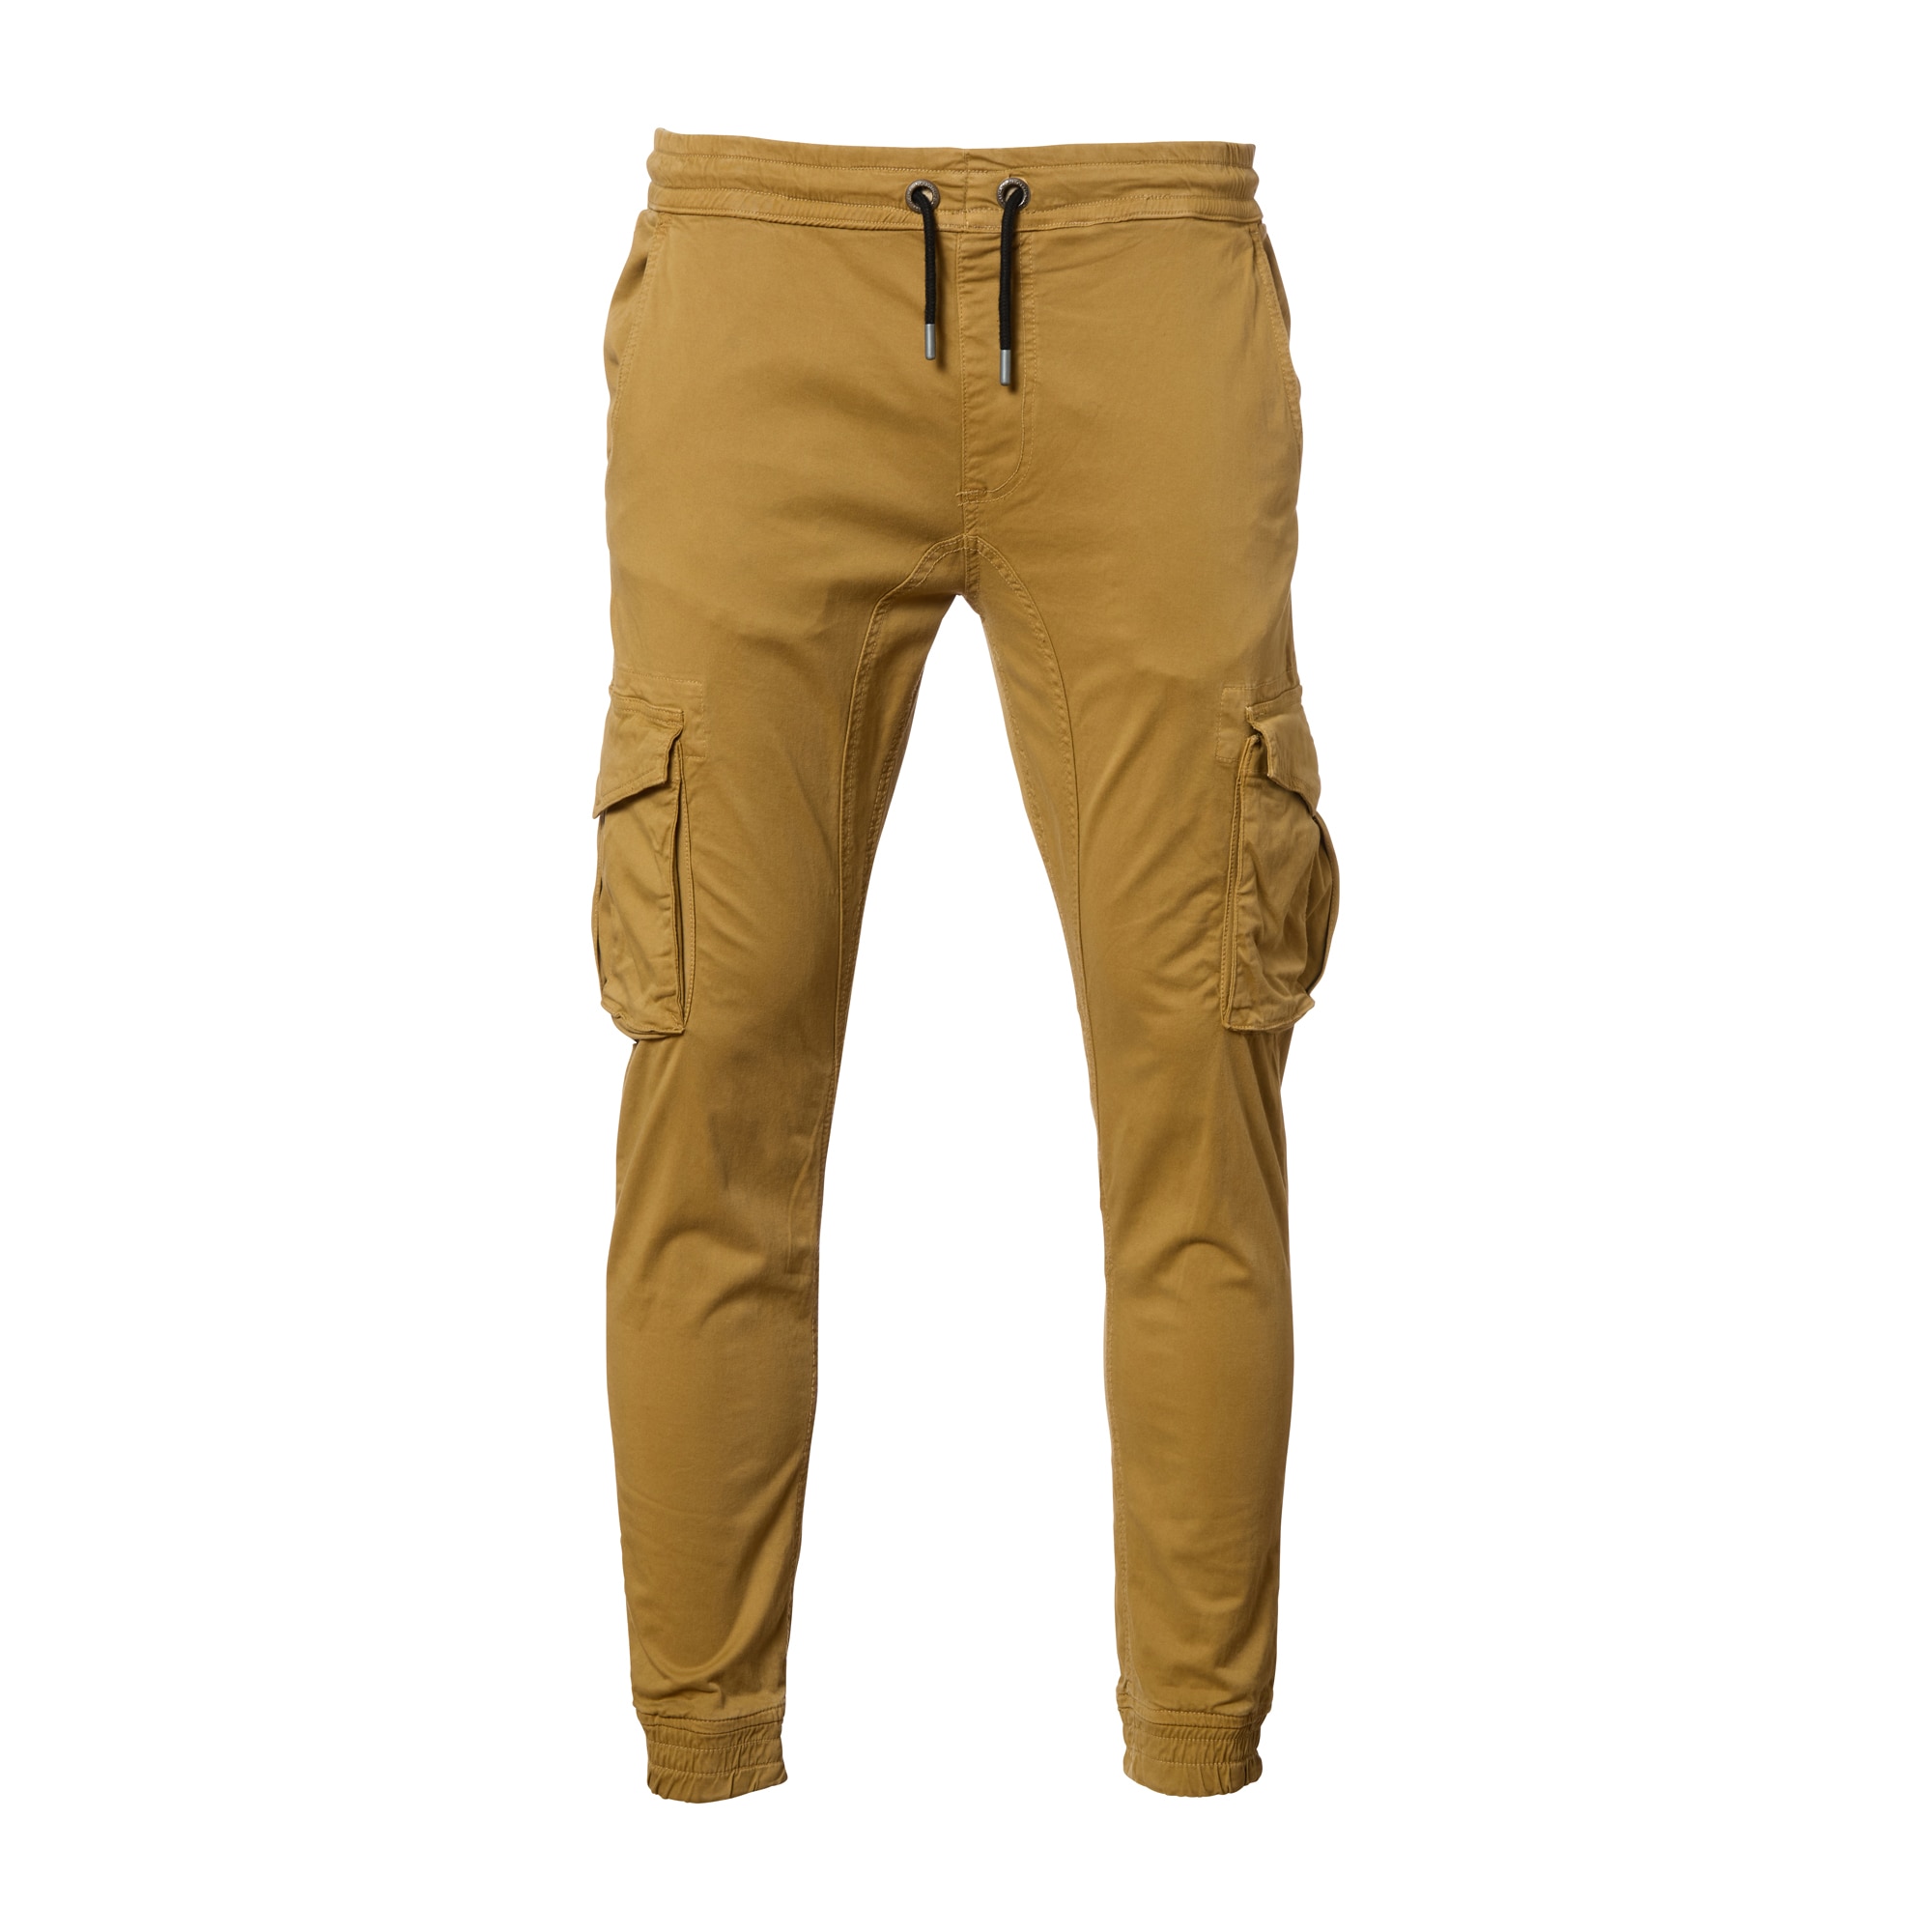 Purchase the Alpha Industries Cotton Twill Jogger Pants khaki by